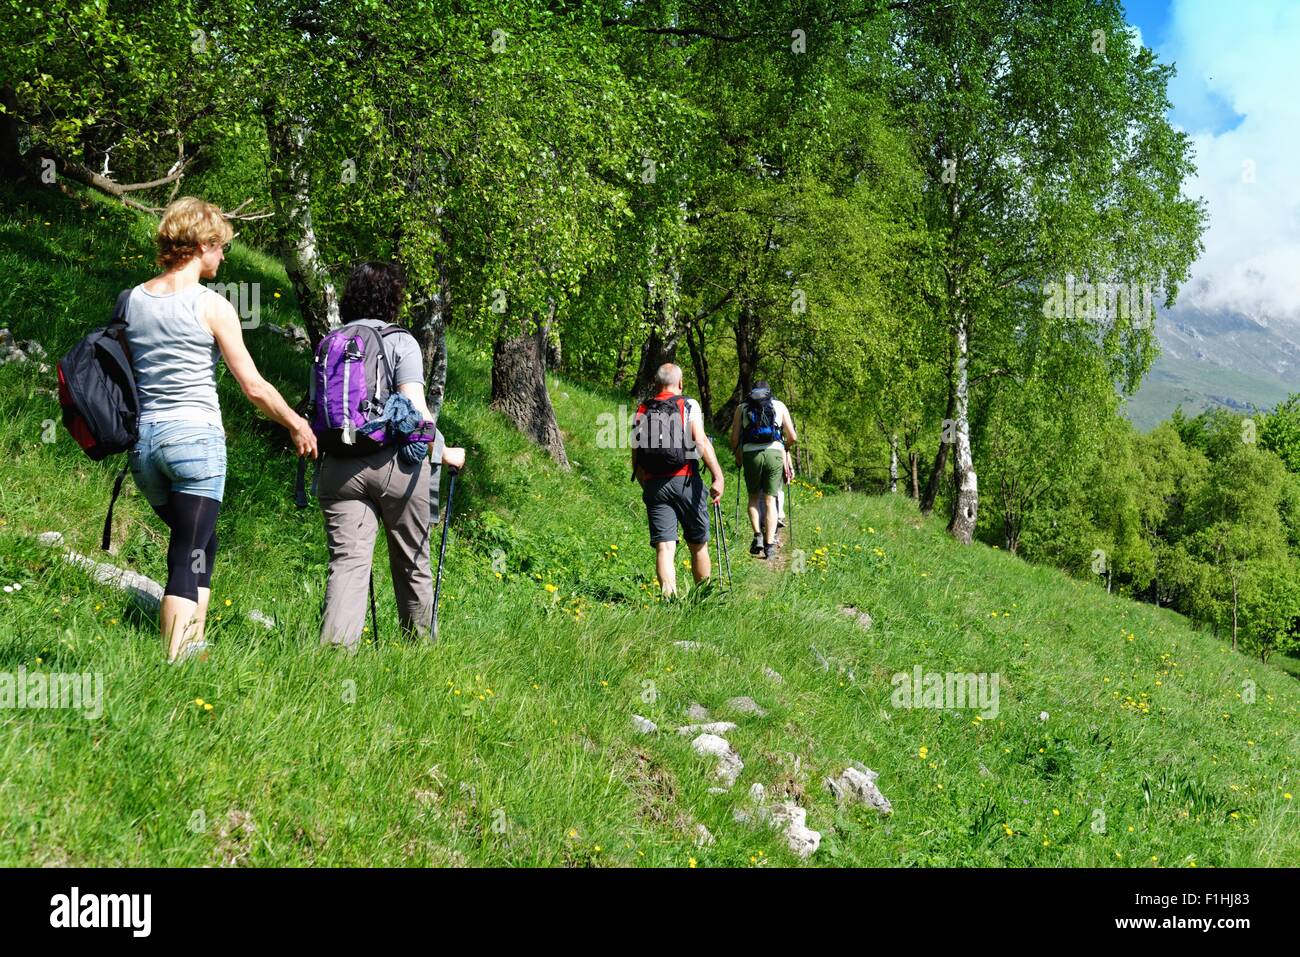 Rear view of four mature hikers hiking along hillside, Grigna, Lecco, Lombardy, Italy Stock Photo